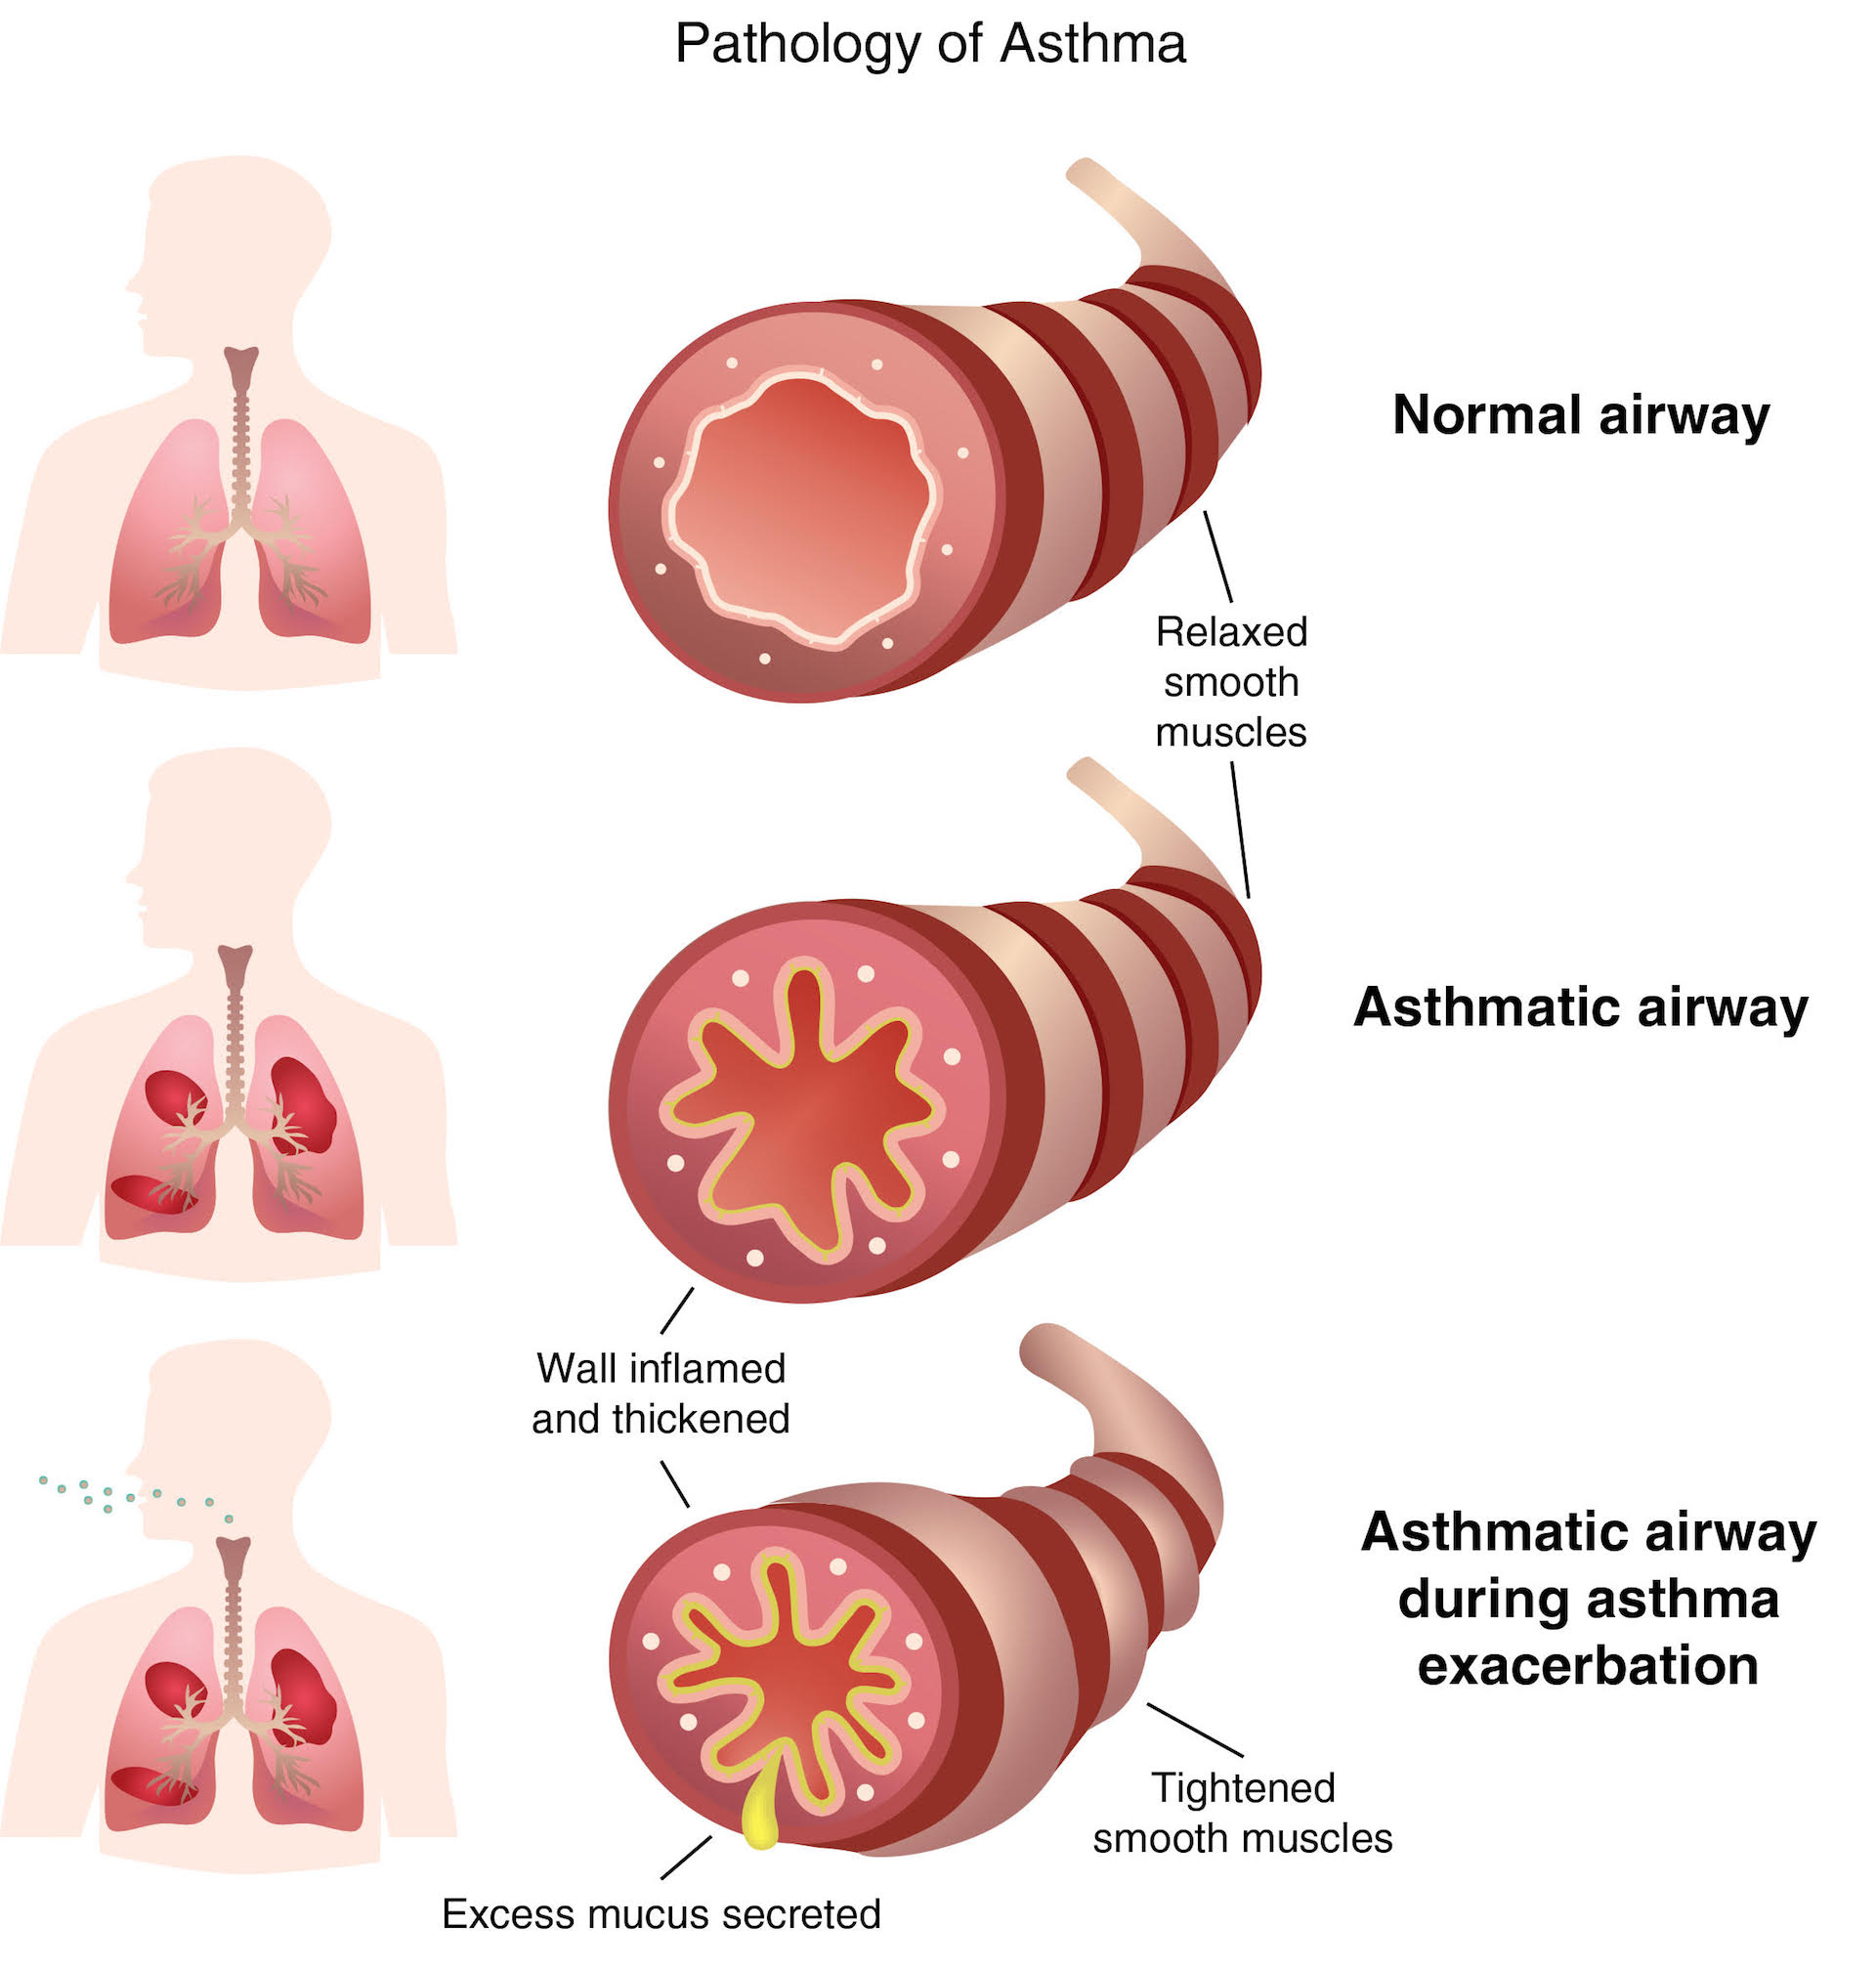 How effective are bronchodilators for asthma